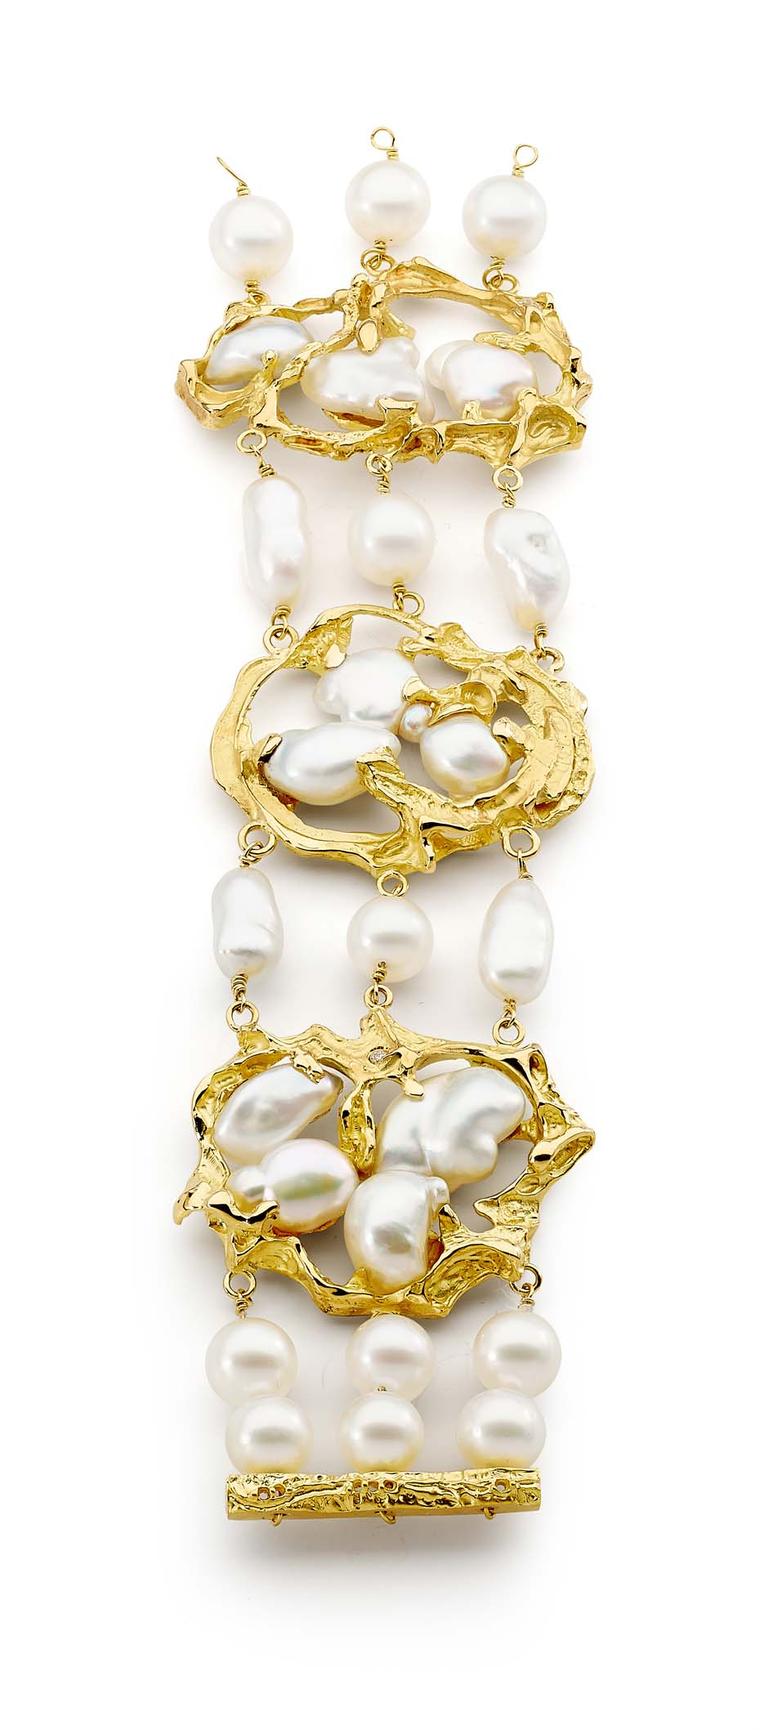 Linneys bracelet in white and yellow gold with Australian South Sea pearls and diamonds.